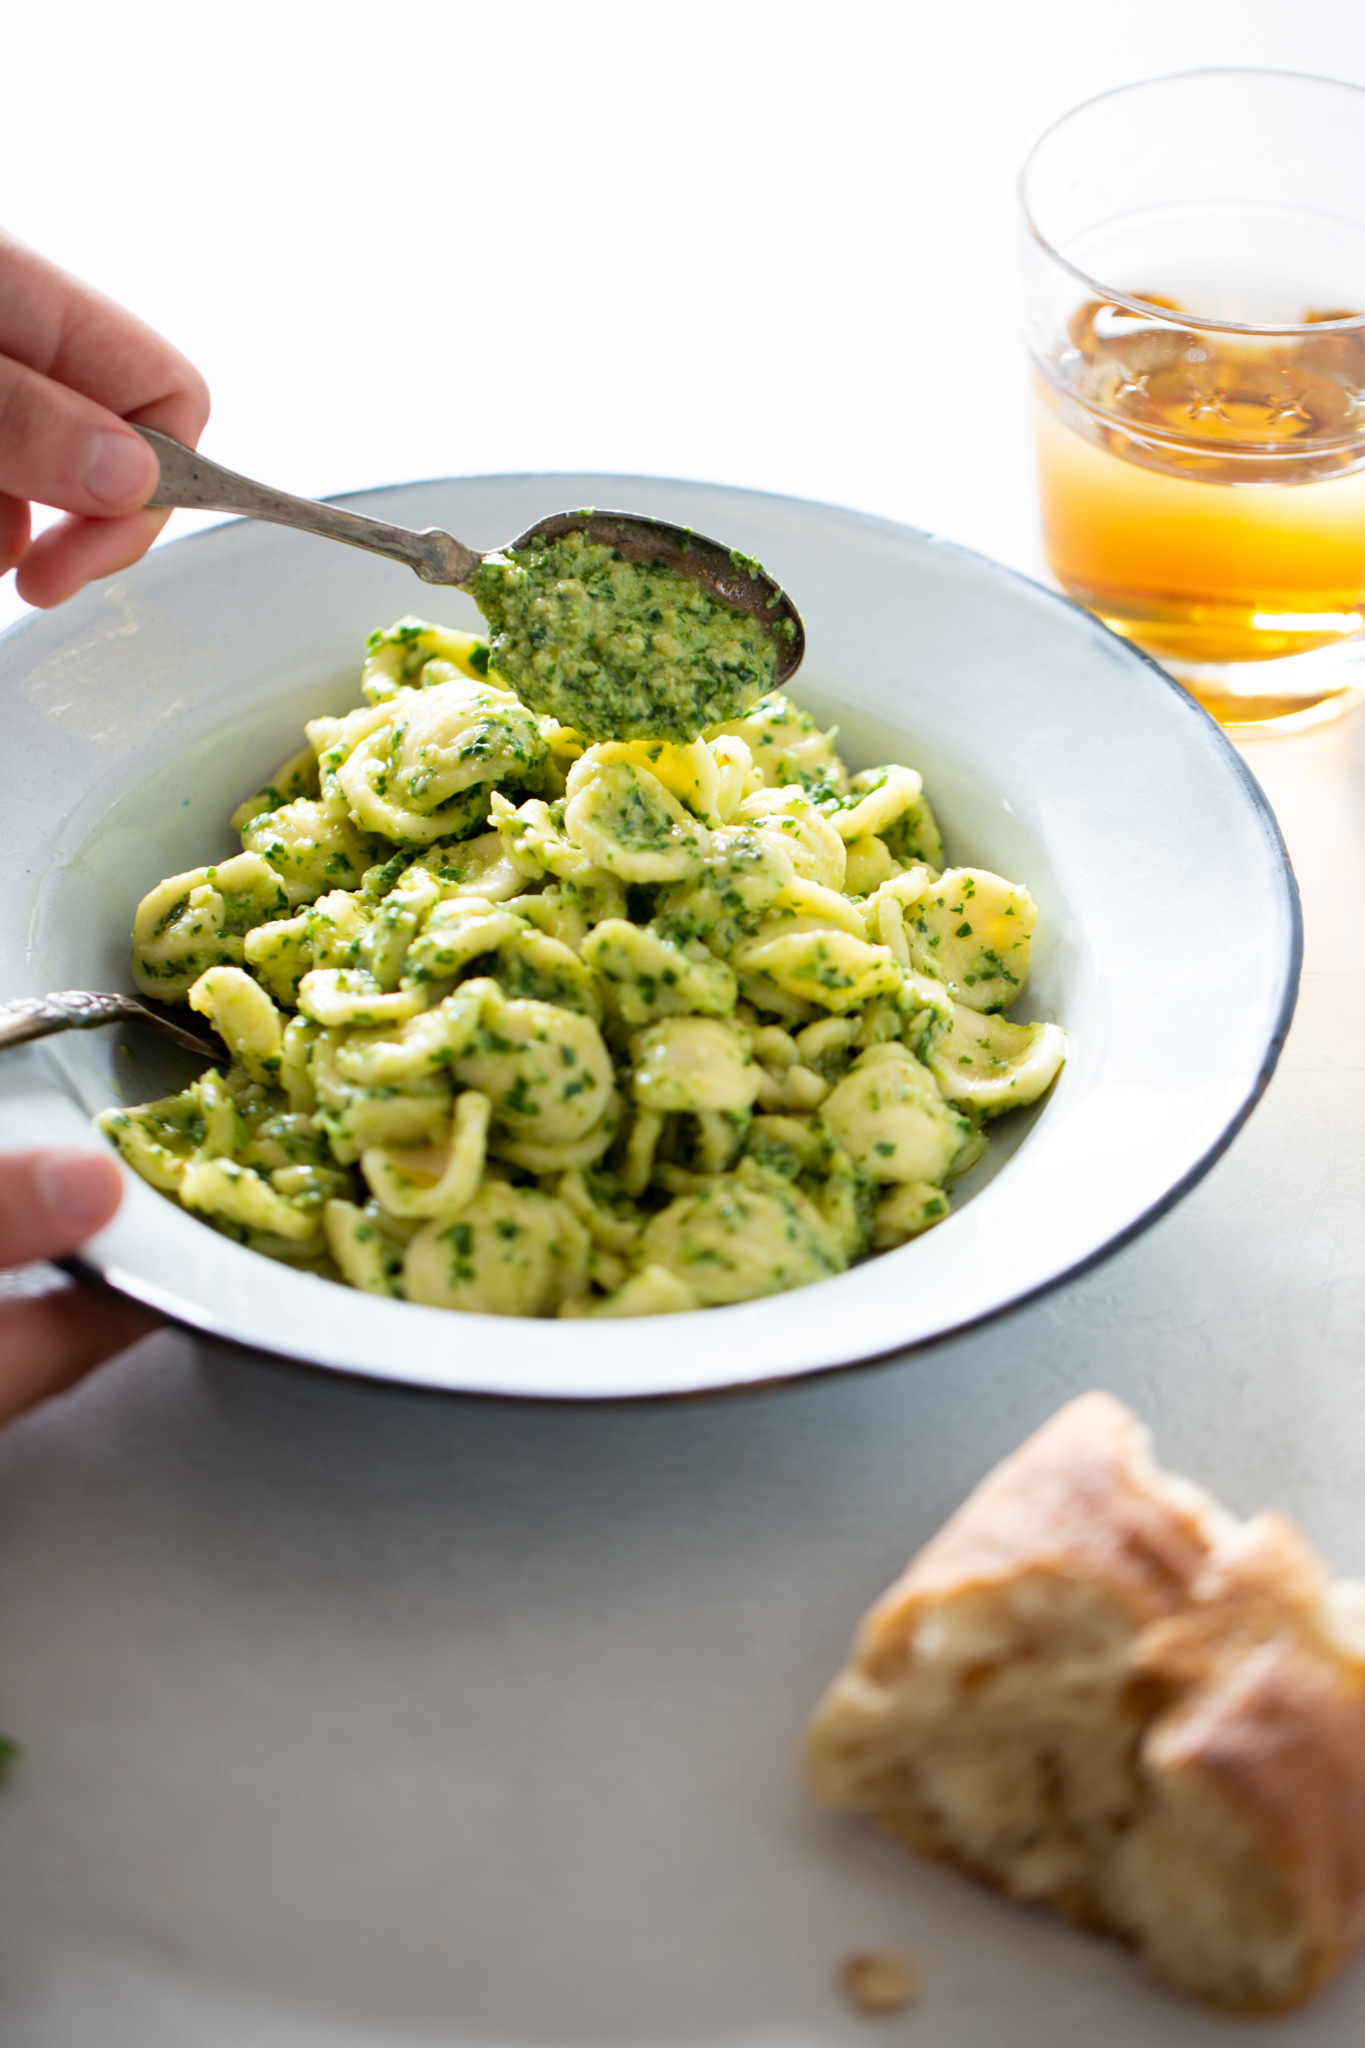 adding a spoonful of kale pesto to the pasta